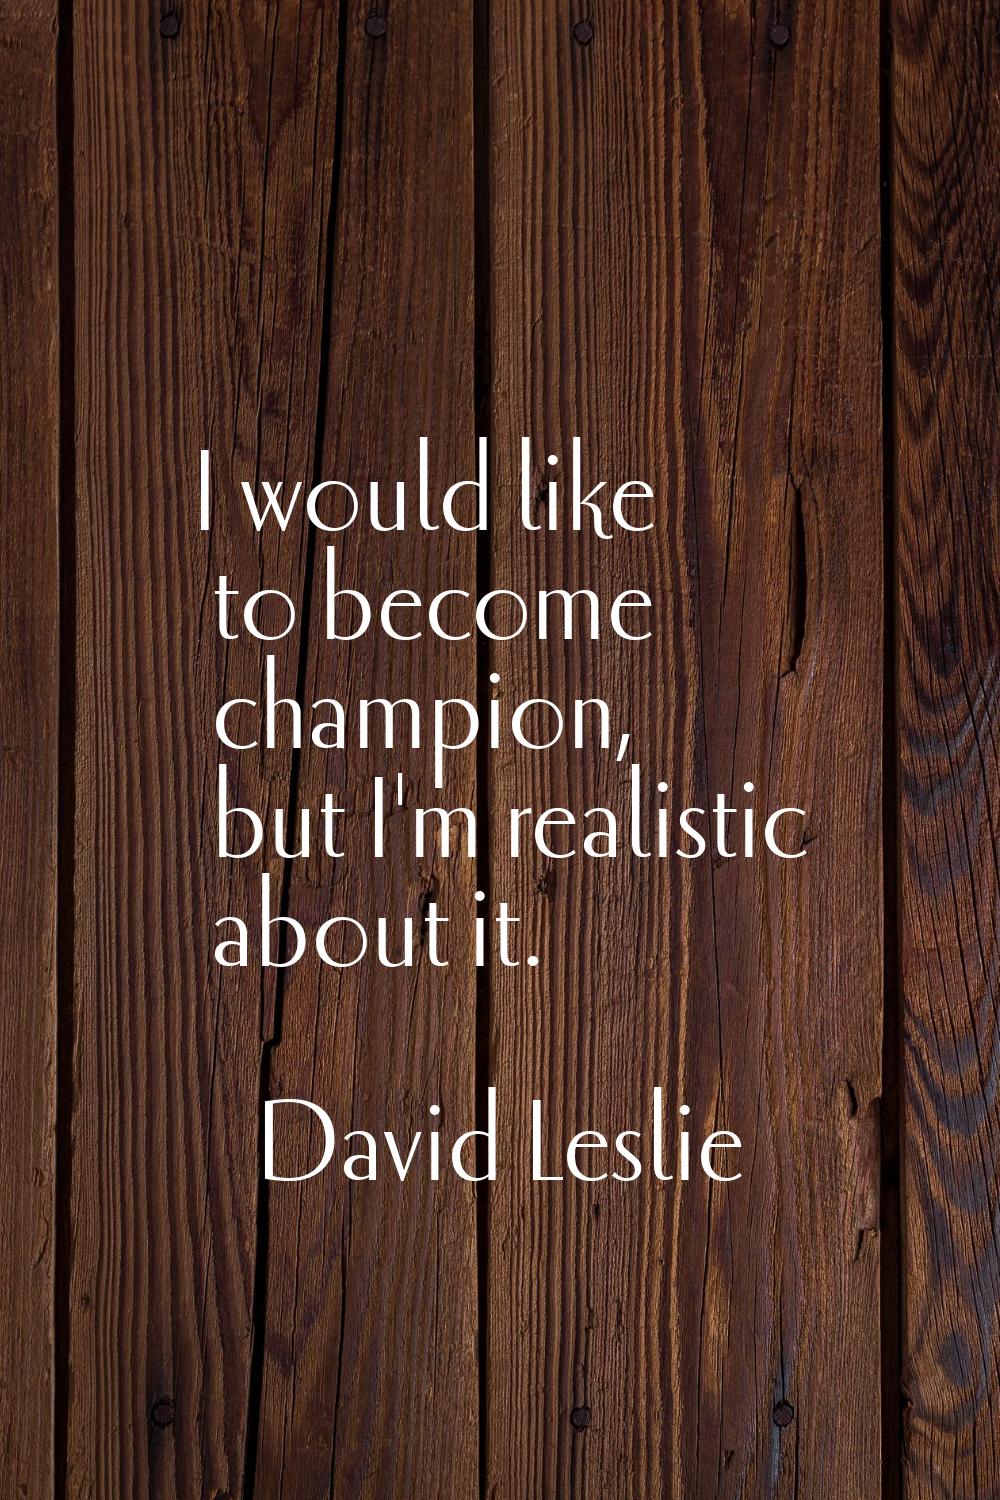 I would like to become champion, but I'm realistic about it.